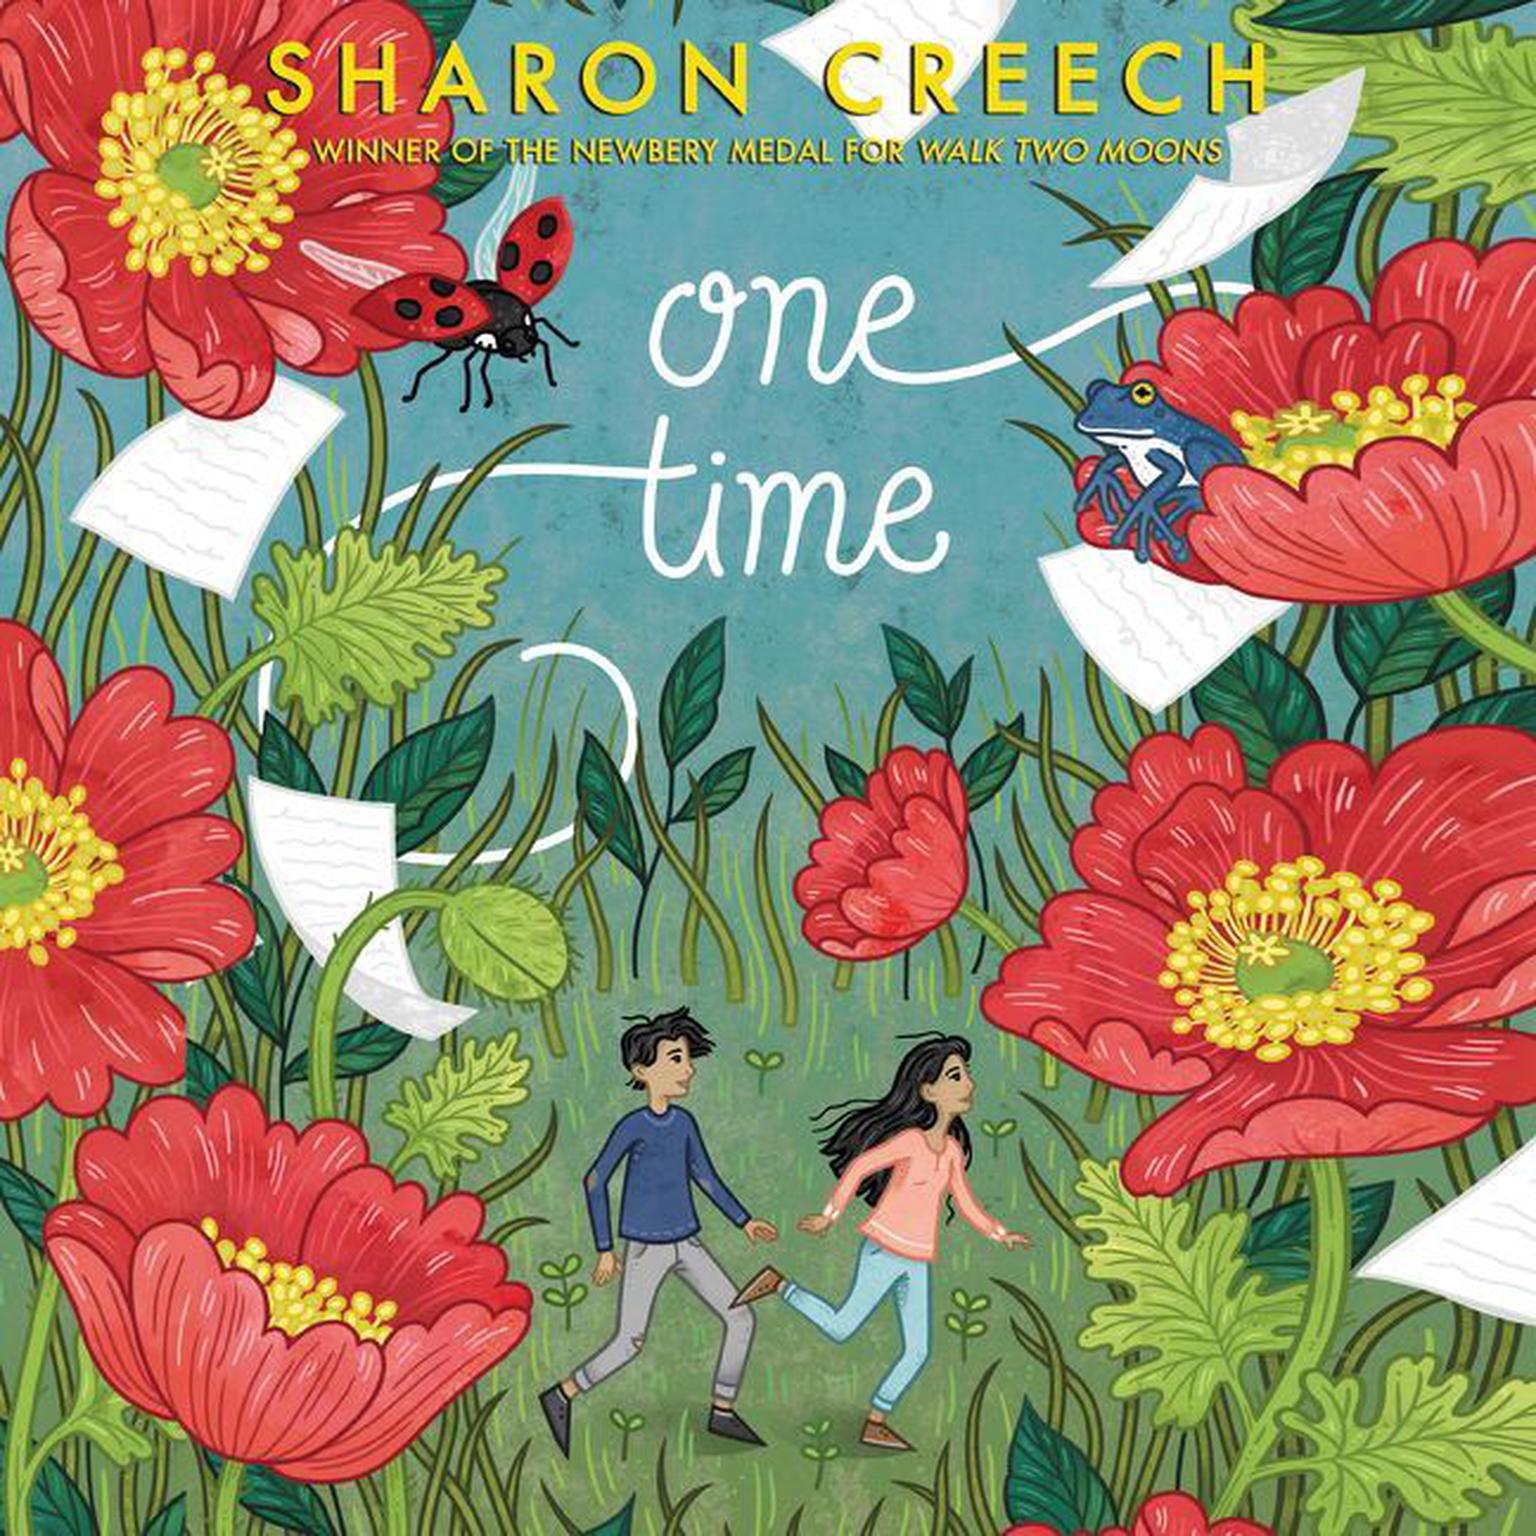 One Time Audiobook, by Sharon Creech